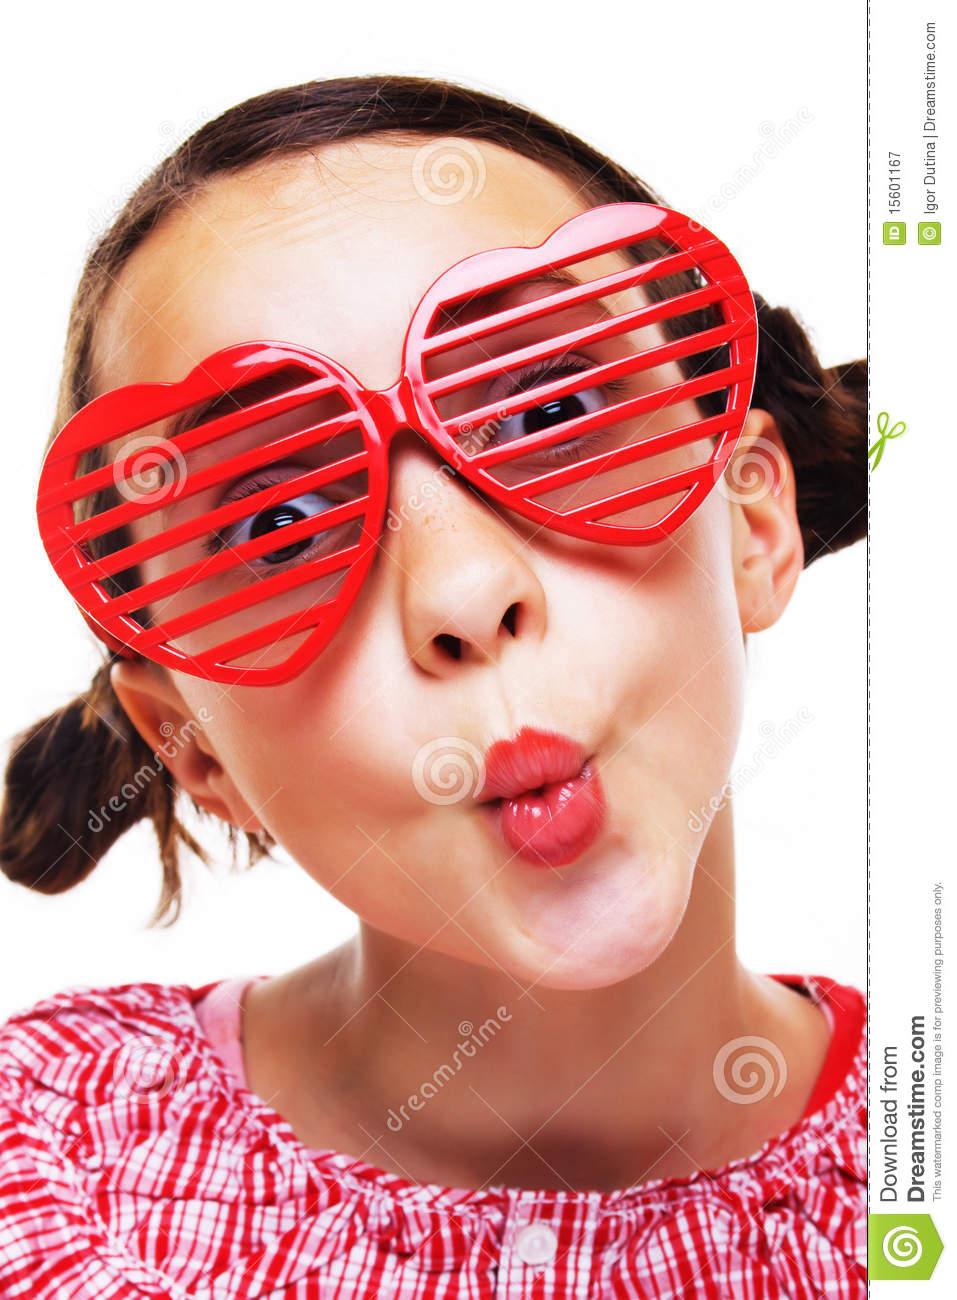 Little Girl With Shutter Shades Royalty Free Stock Photography   Image